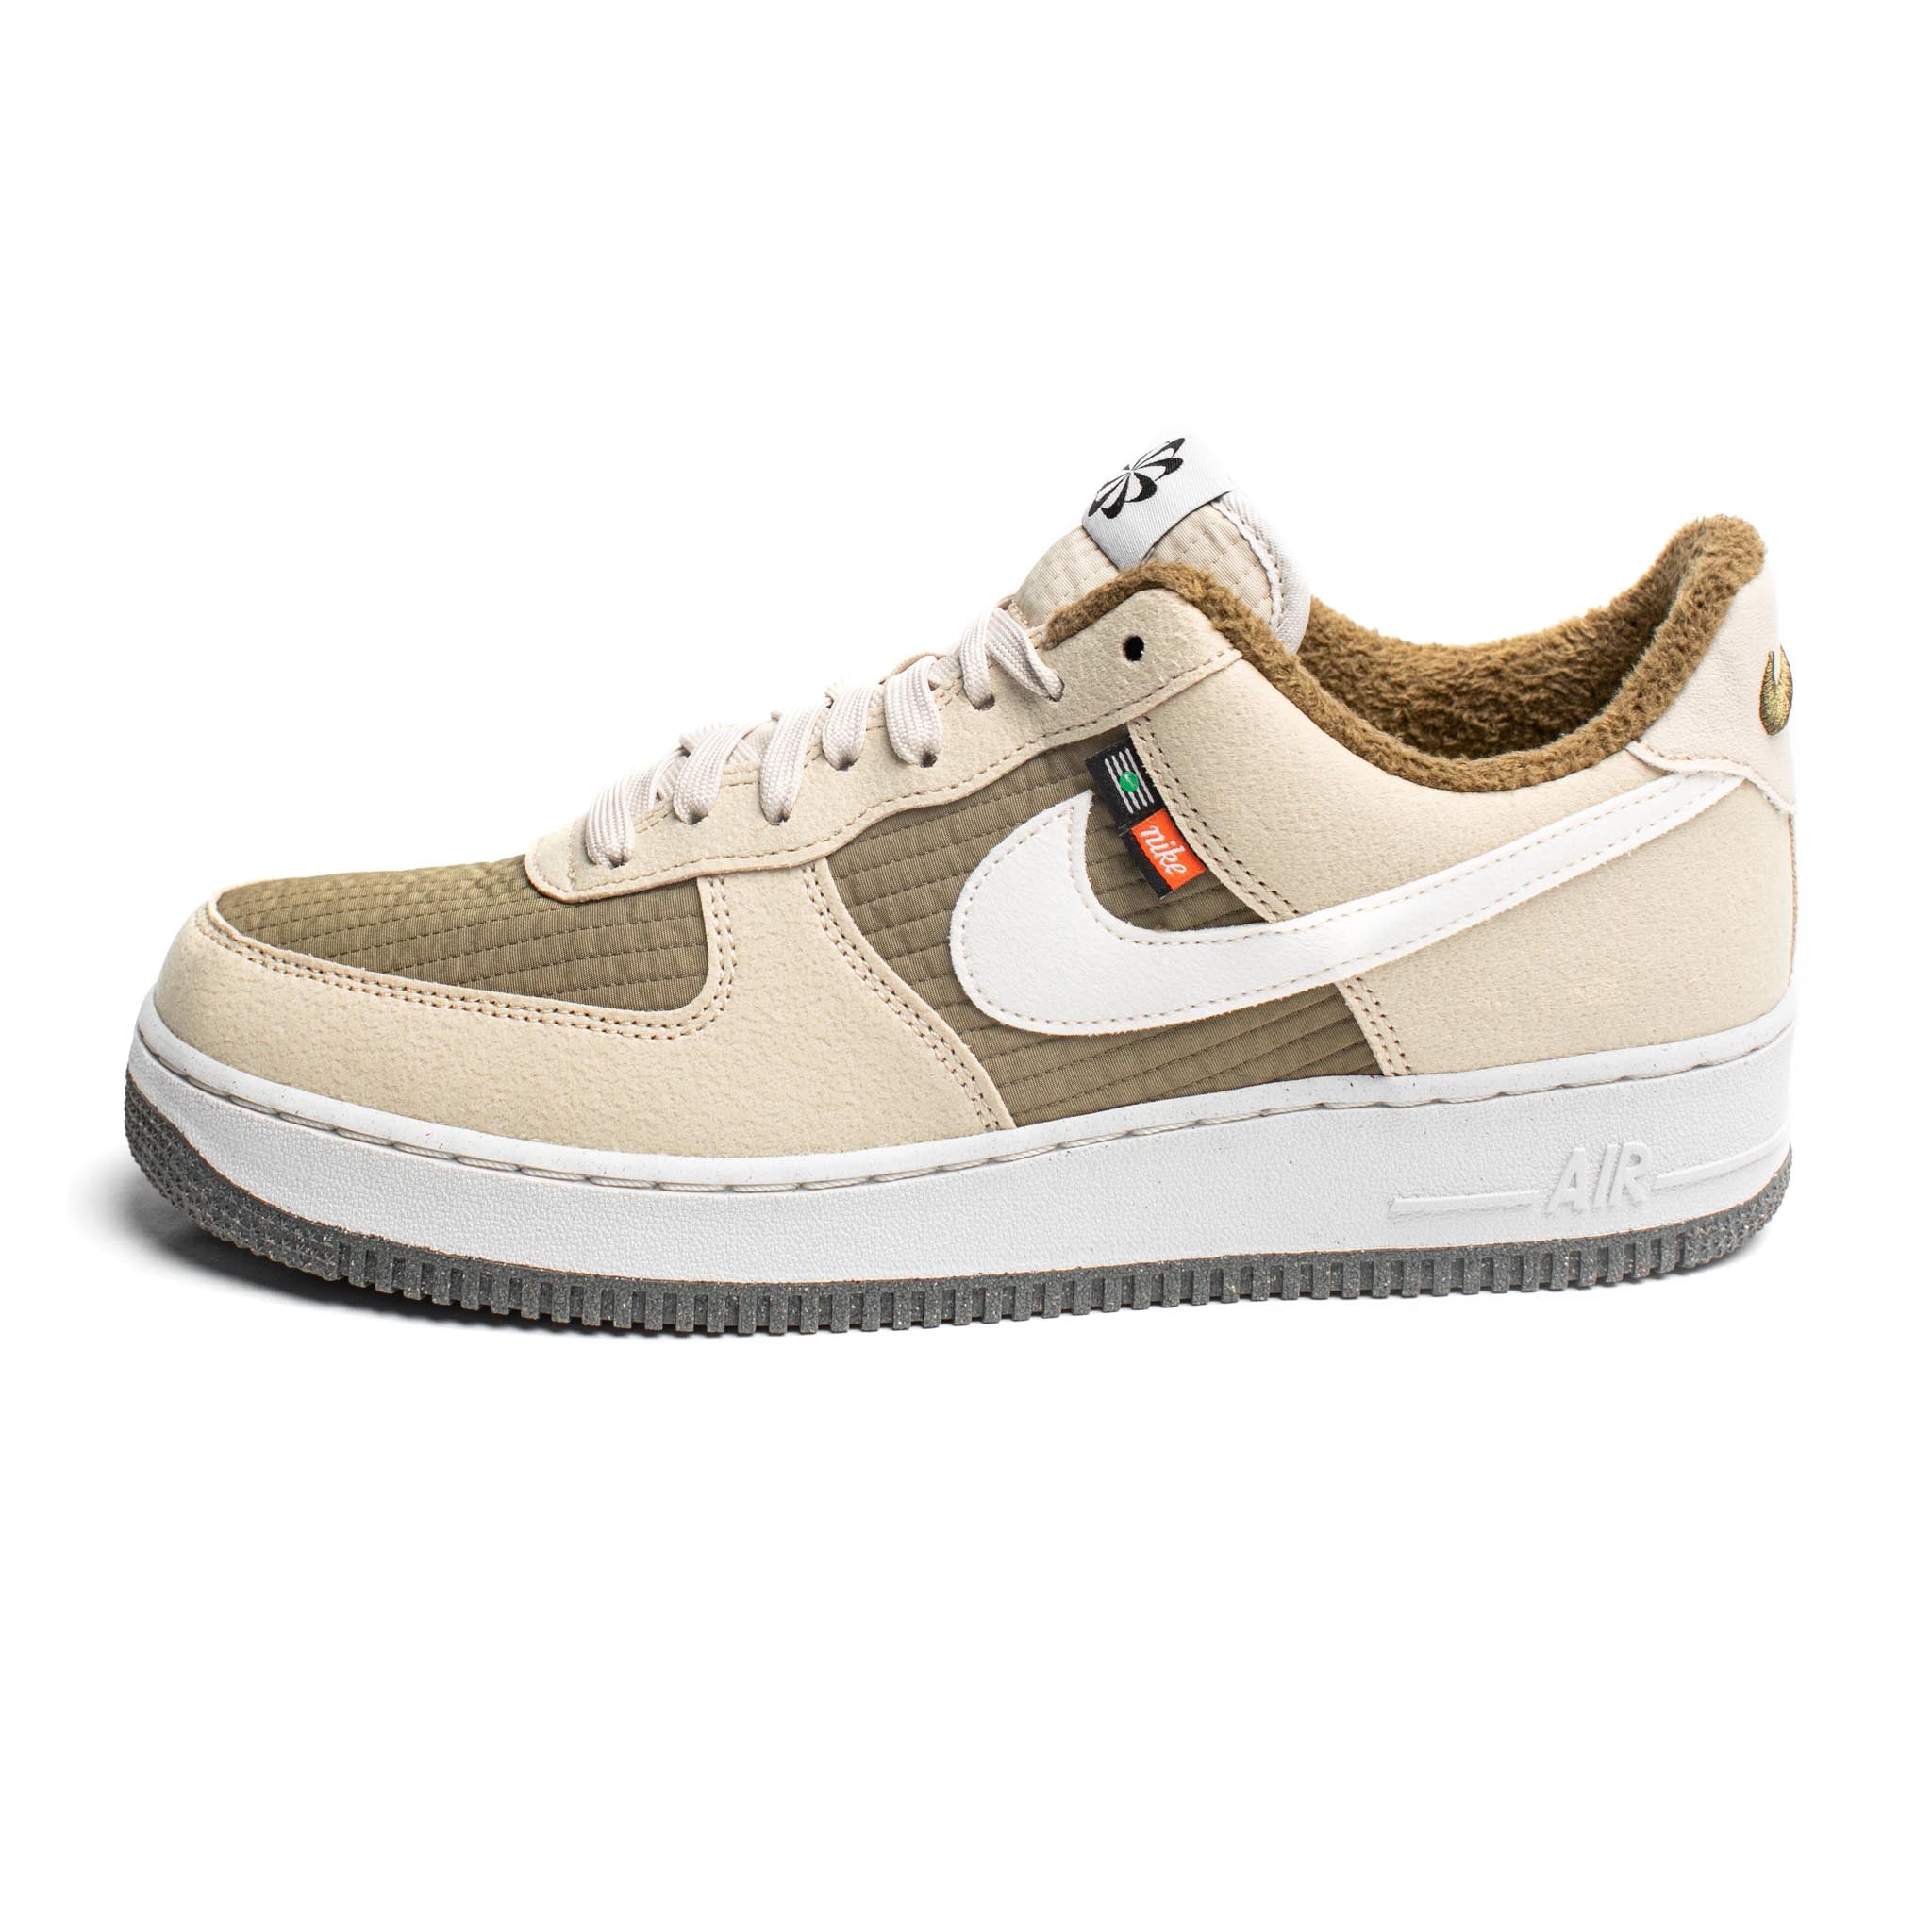 Nike Air Force 1 '07 LV8 Toasty, DC8871-200